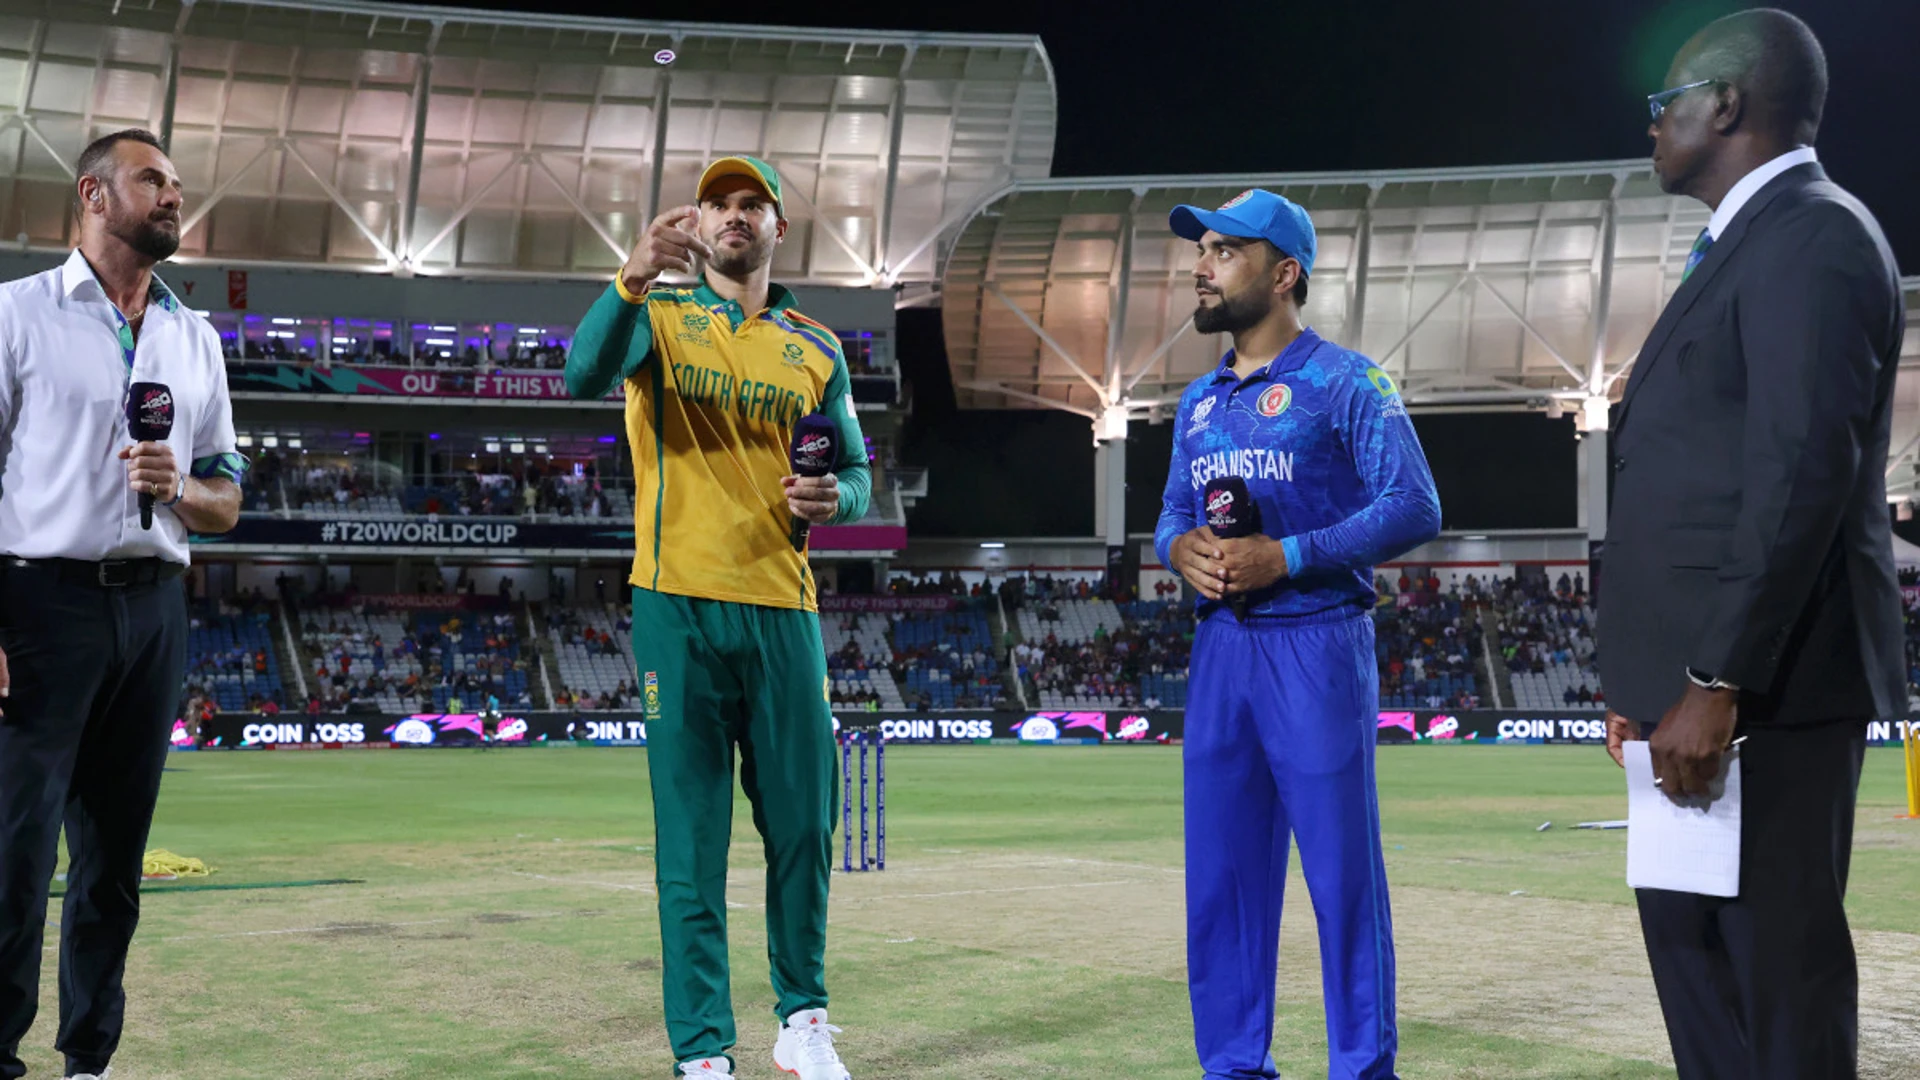 Afghanistan wins the toss and elects to bat first